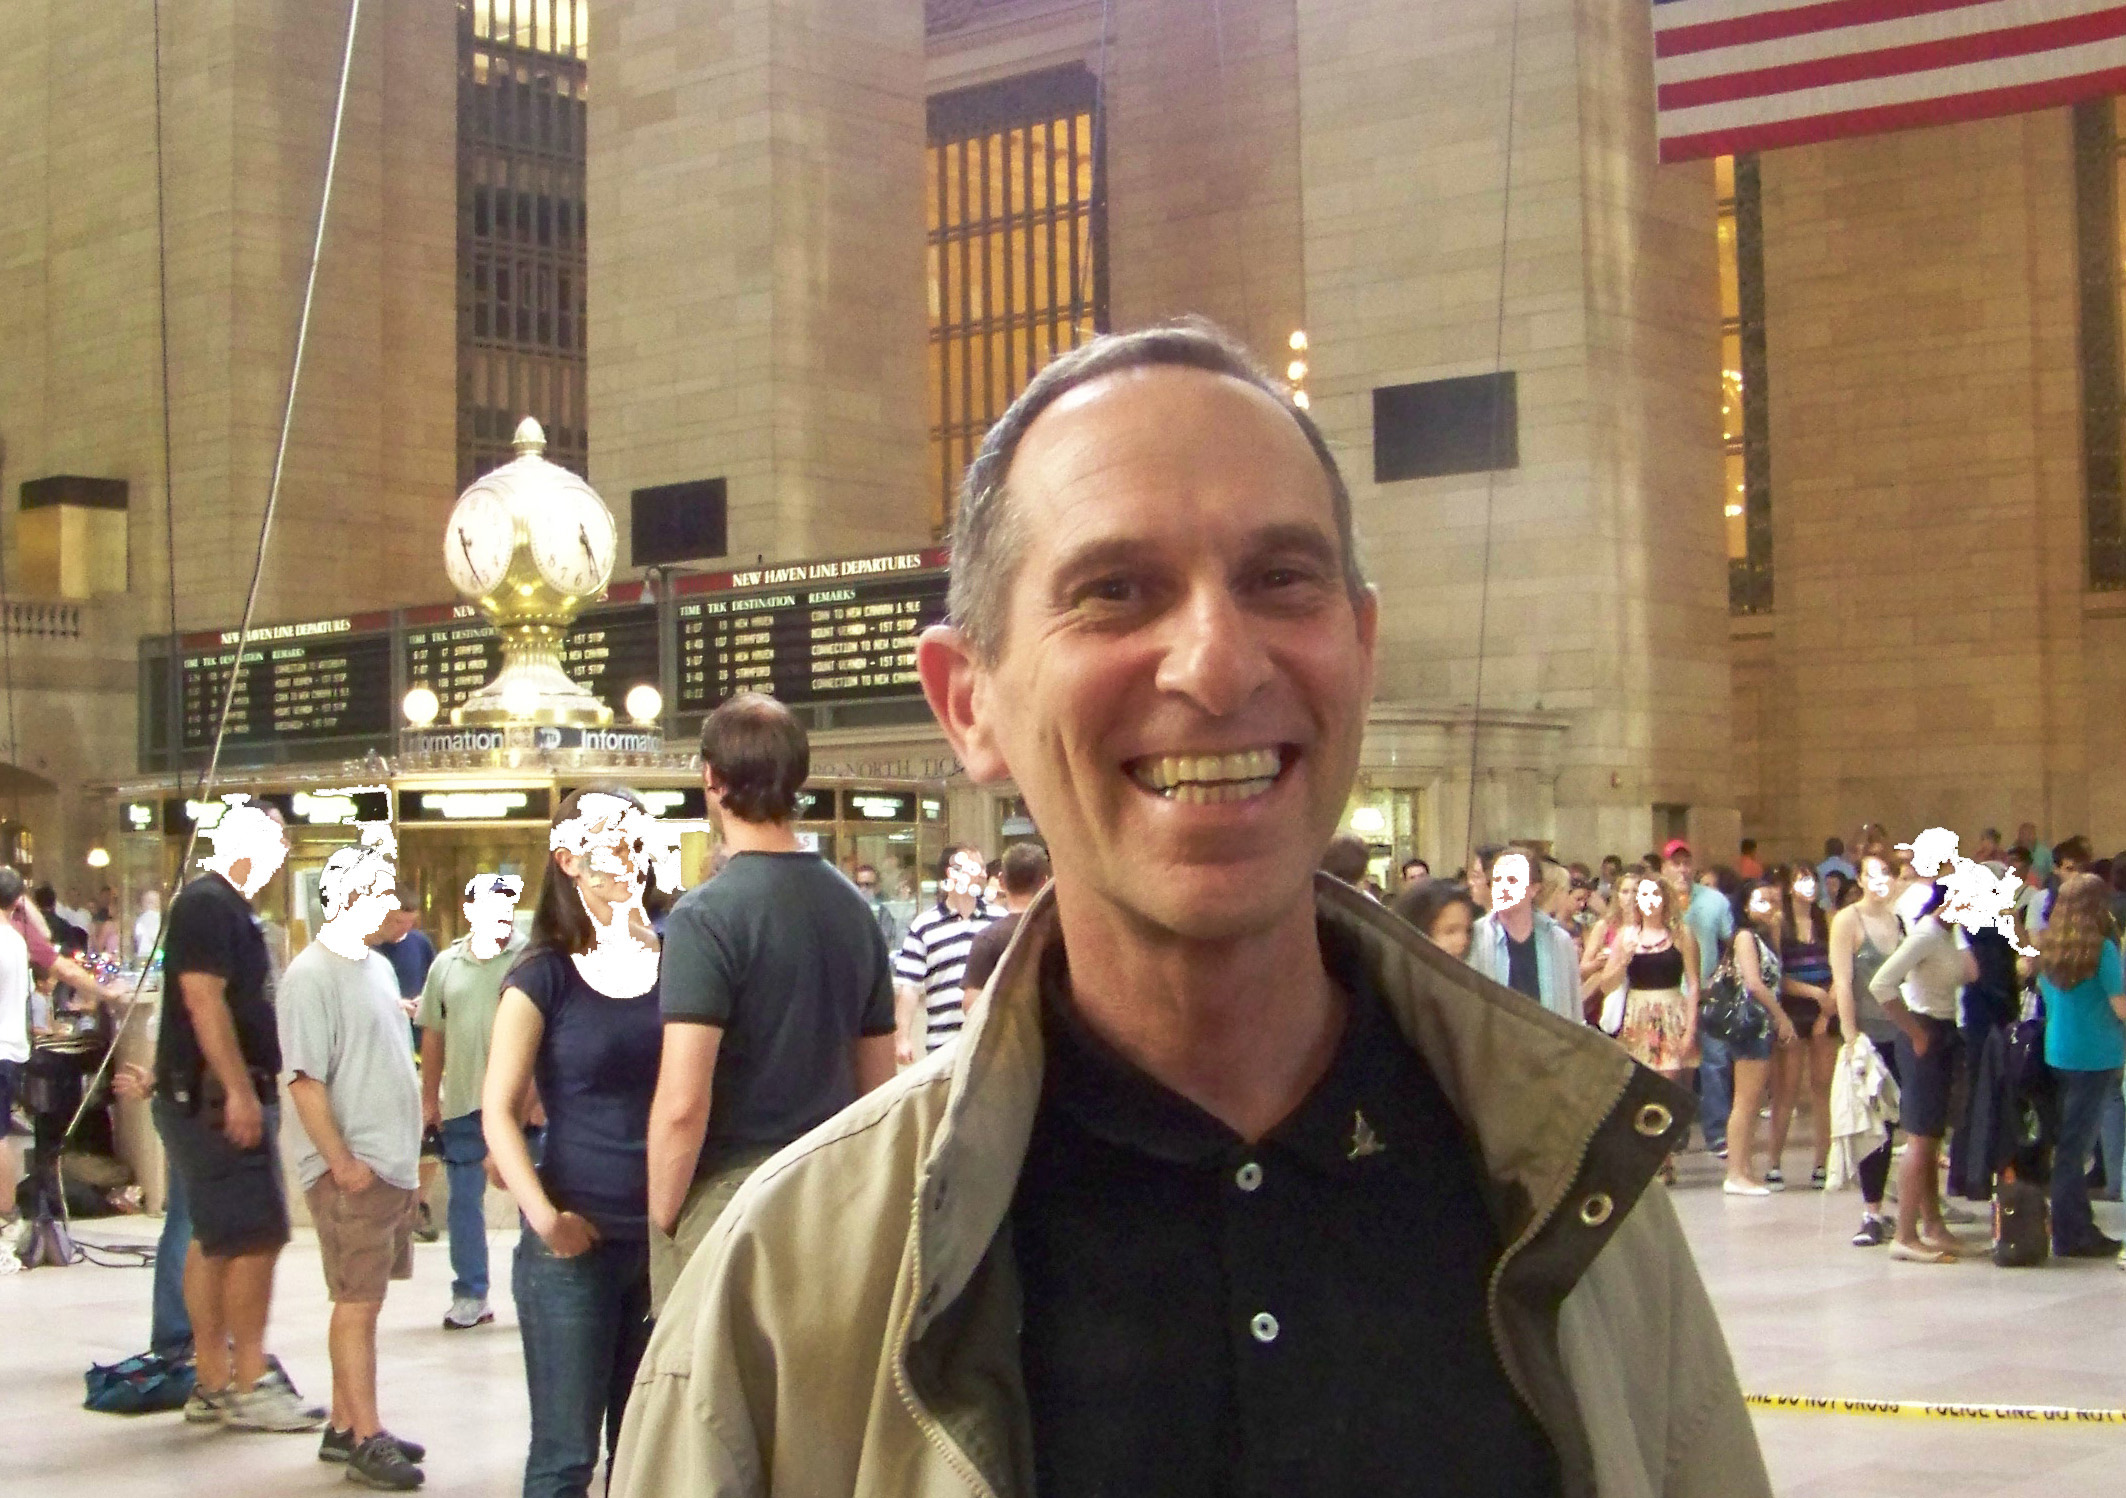 (date posted). On the set of Step Up 3D, Grand Central Terminal, New York City, July 2009.